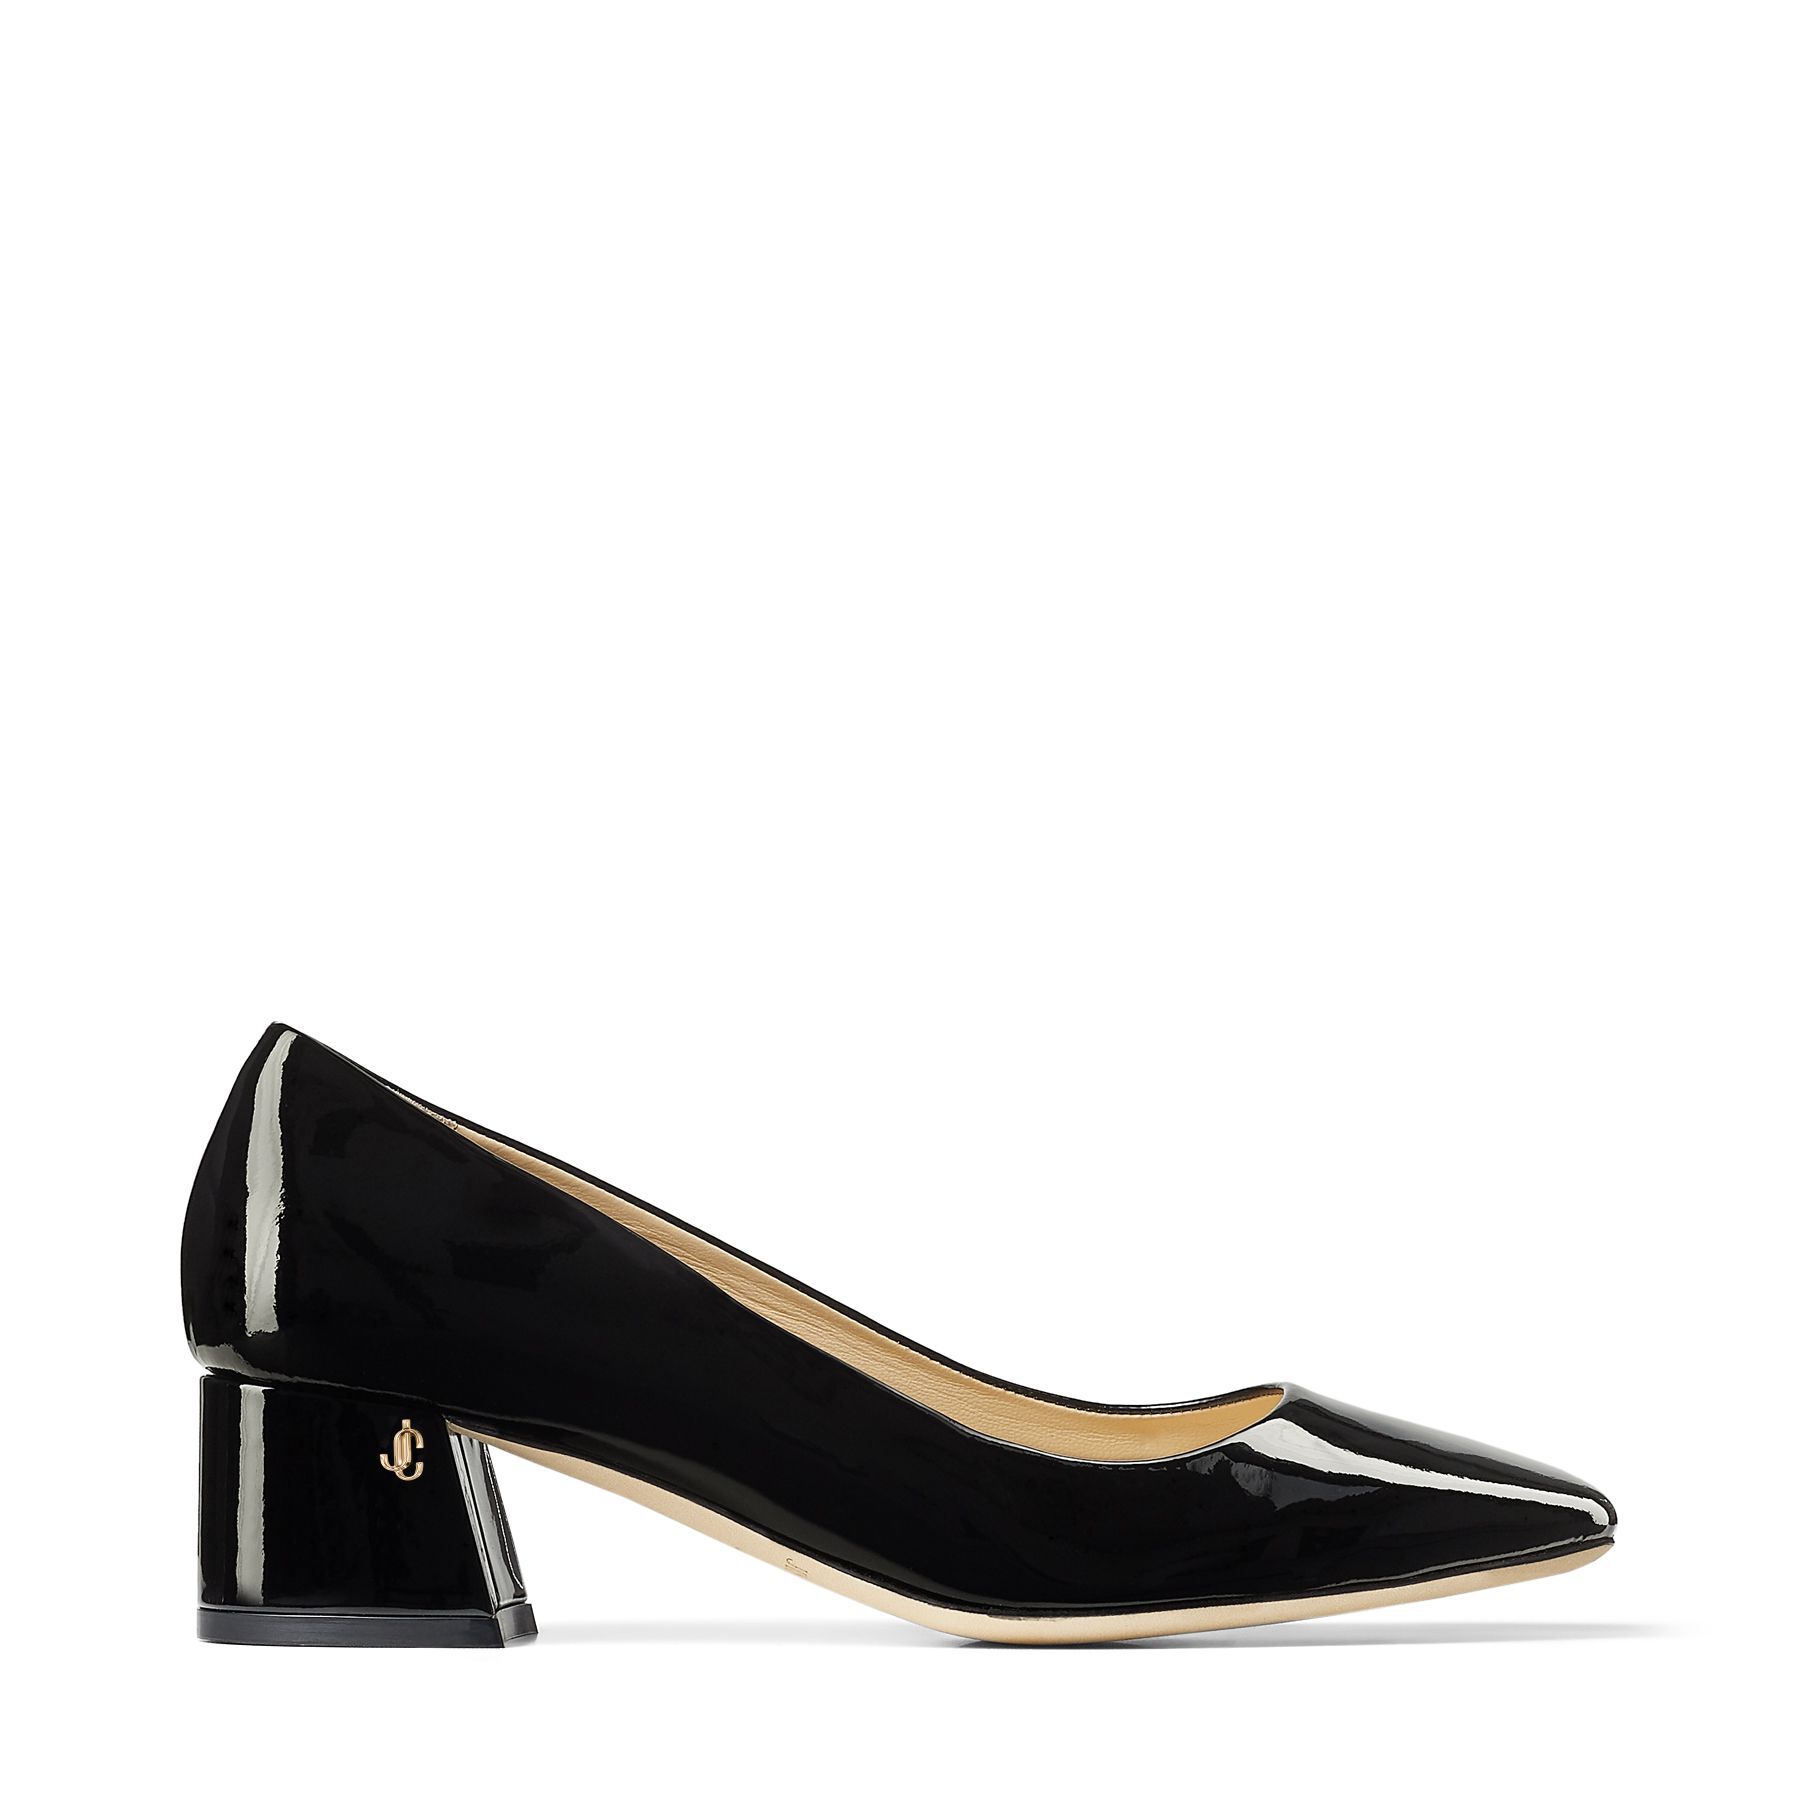 Black Patent Leather Pumps with Chunky Heel | DIANNE 45| Autumn-Winter ...